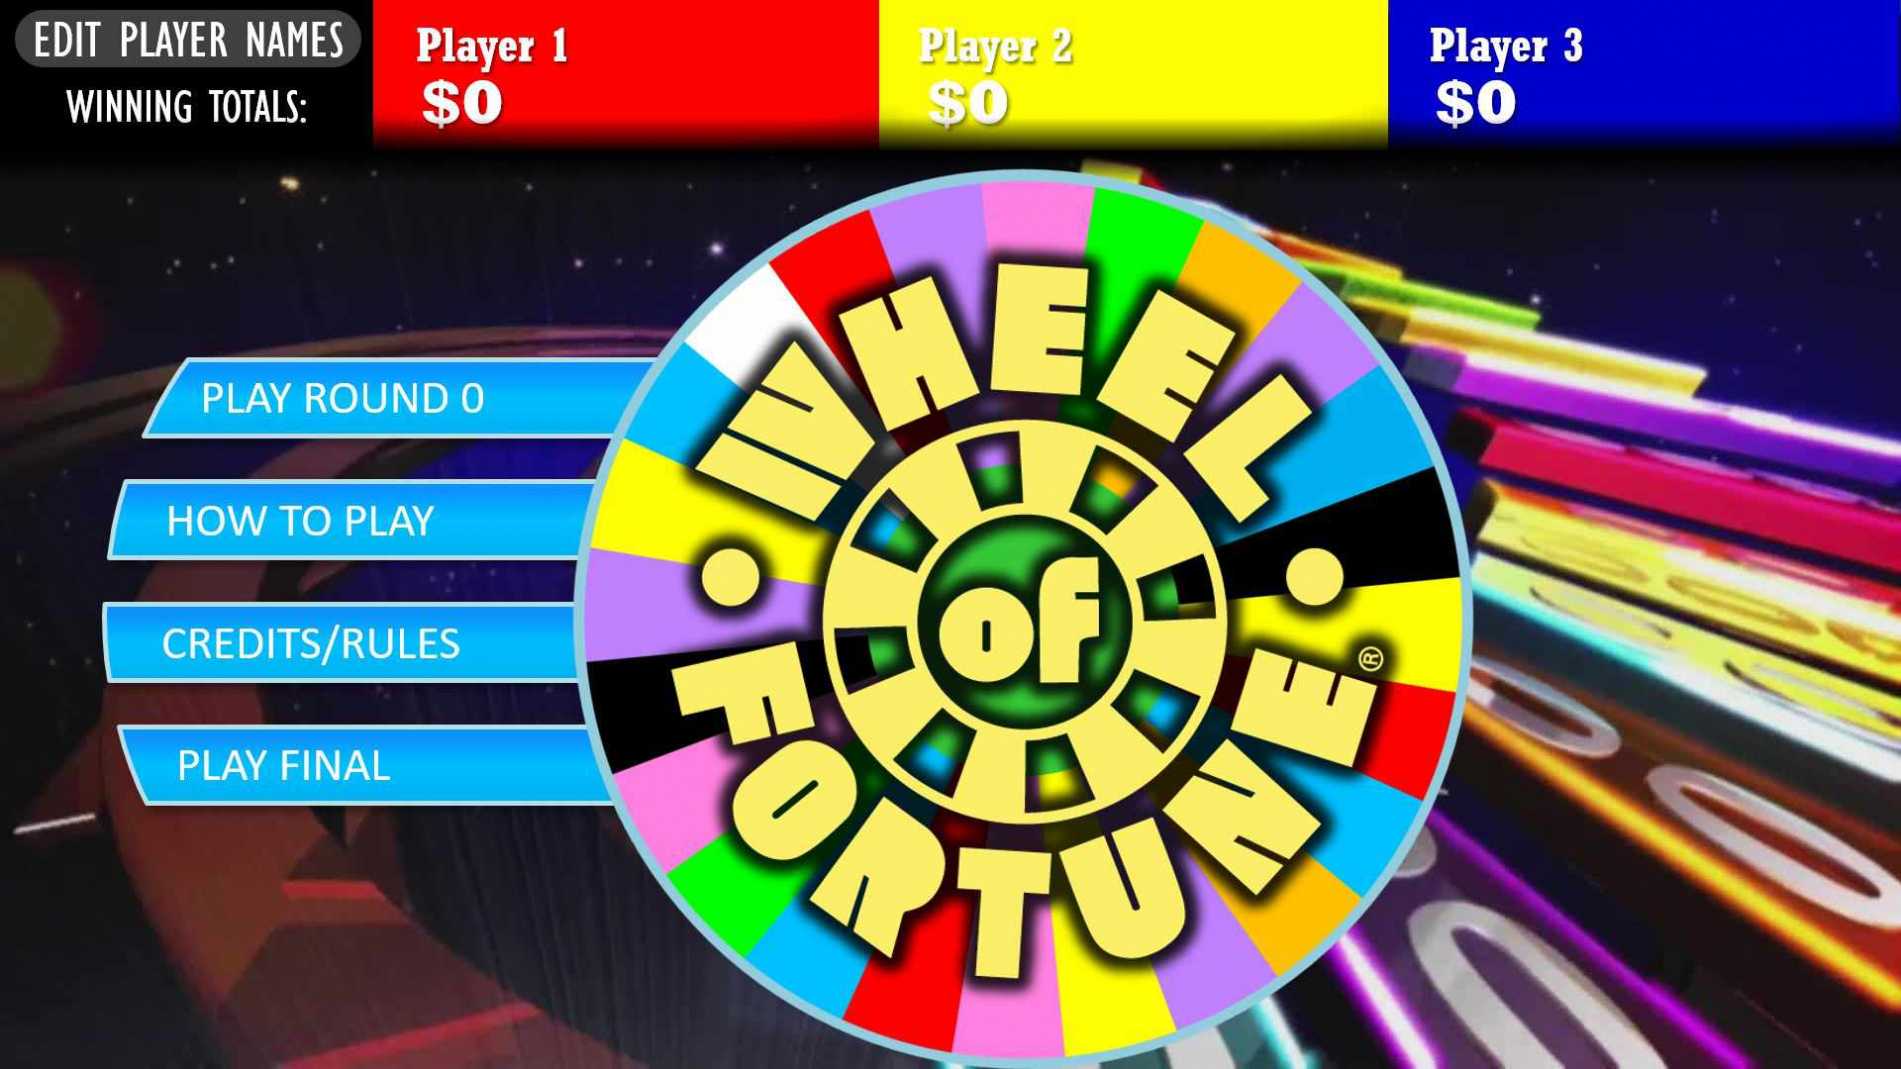 Wheel Of Fortune Powerpoint Game Show Templates Creative